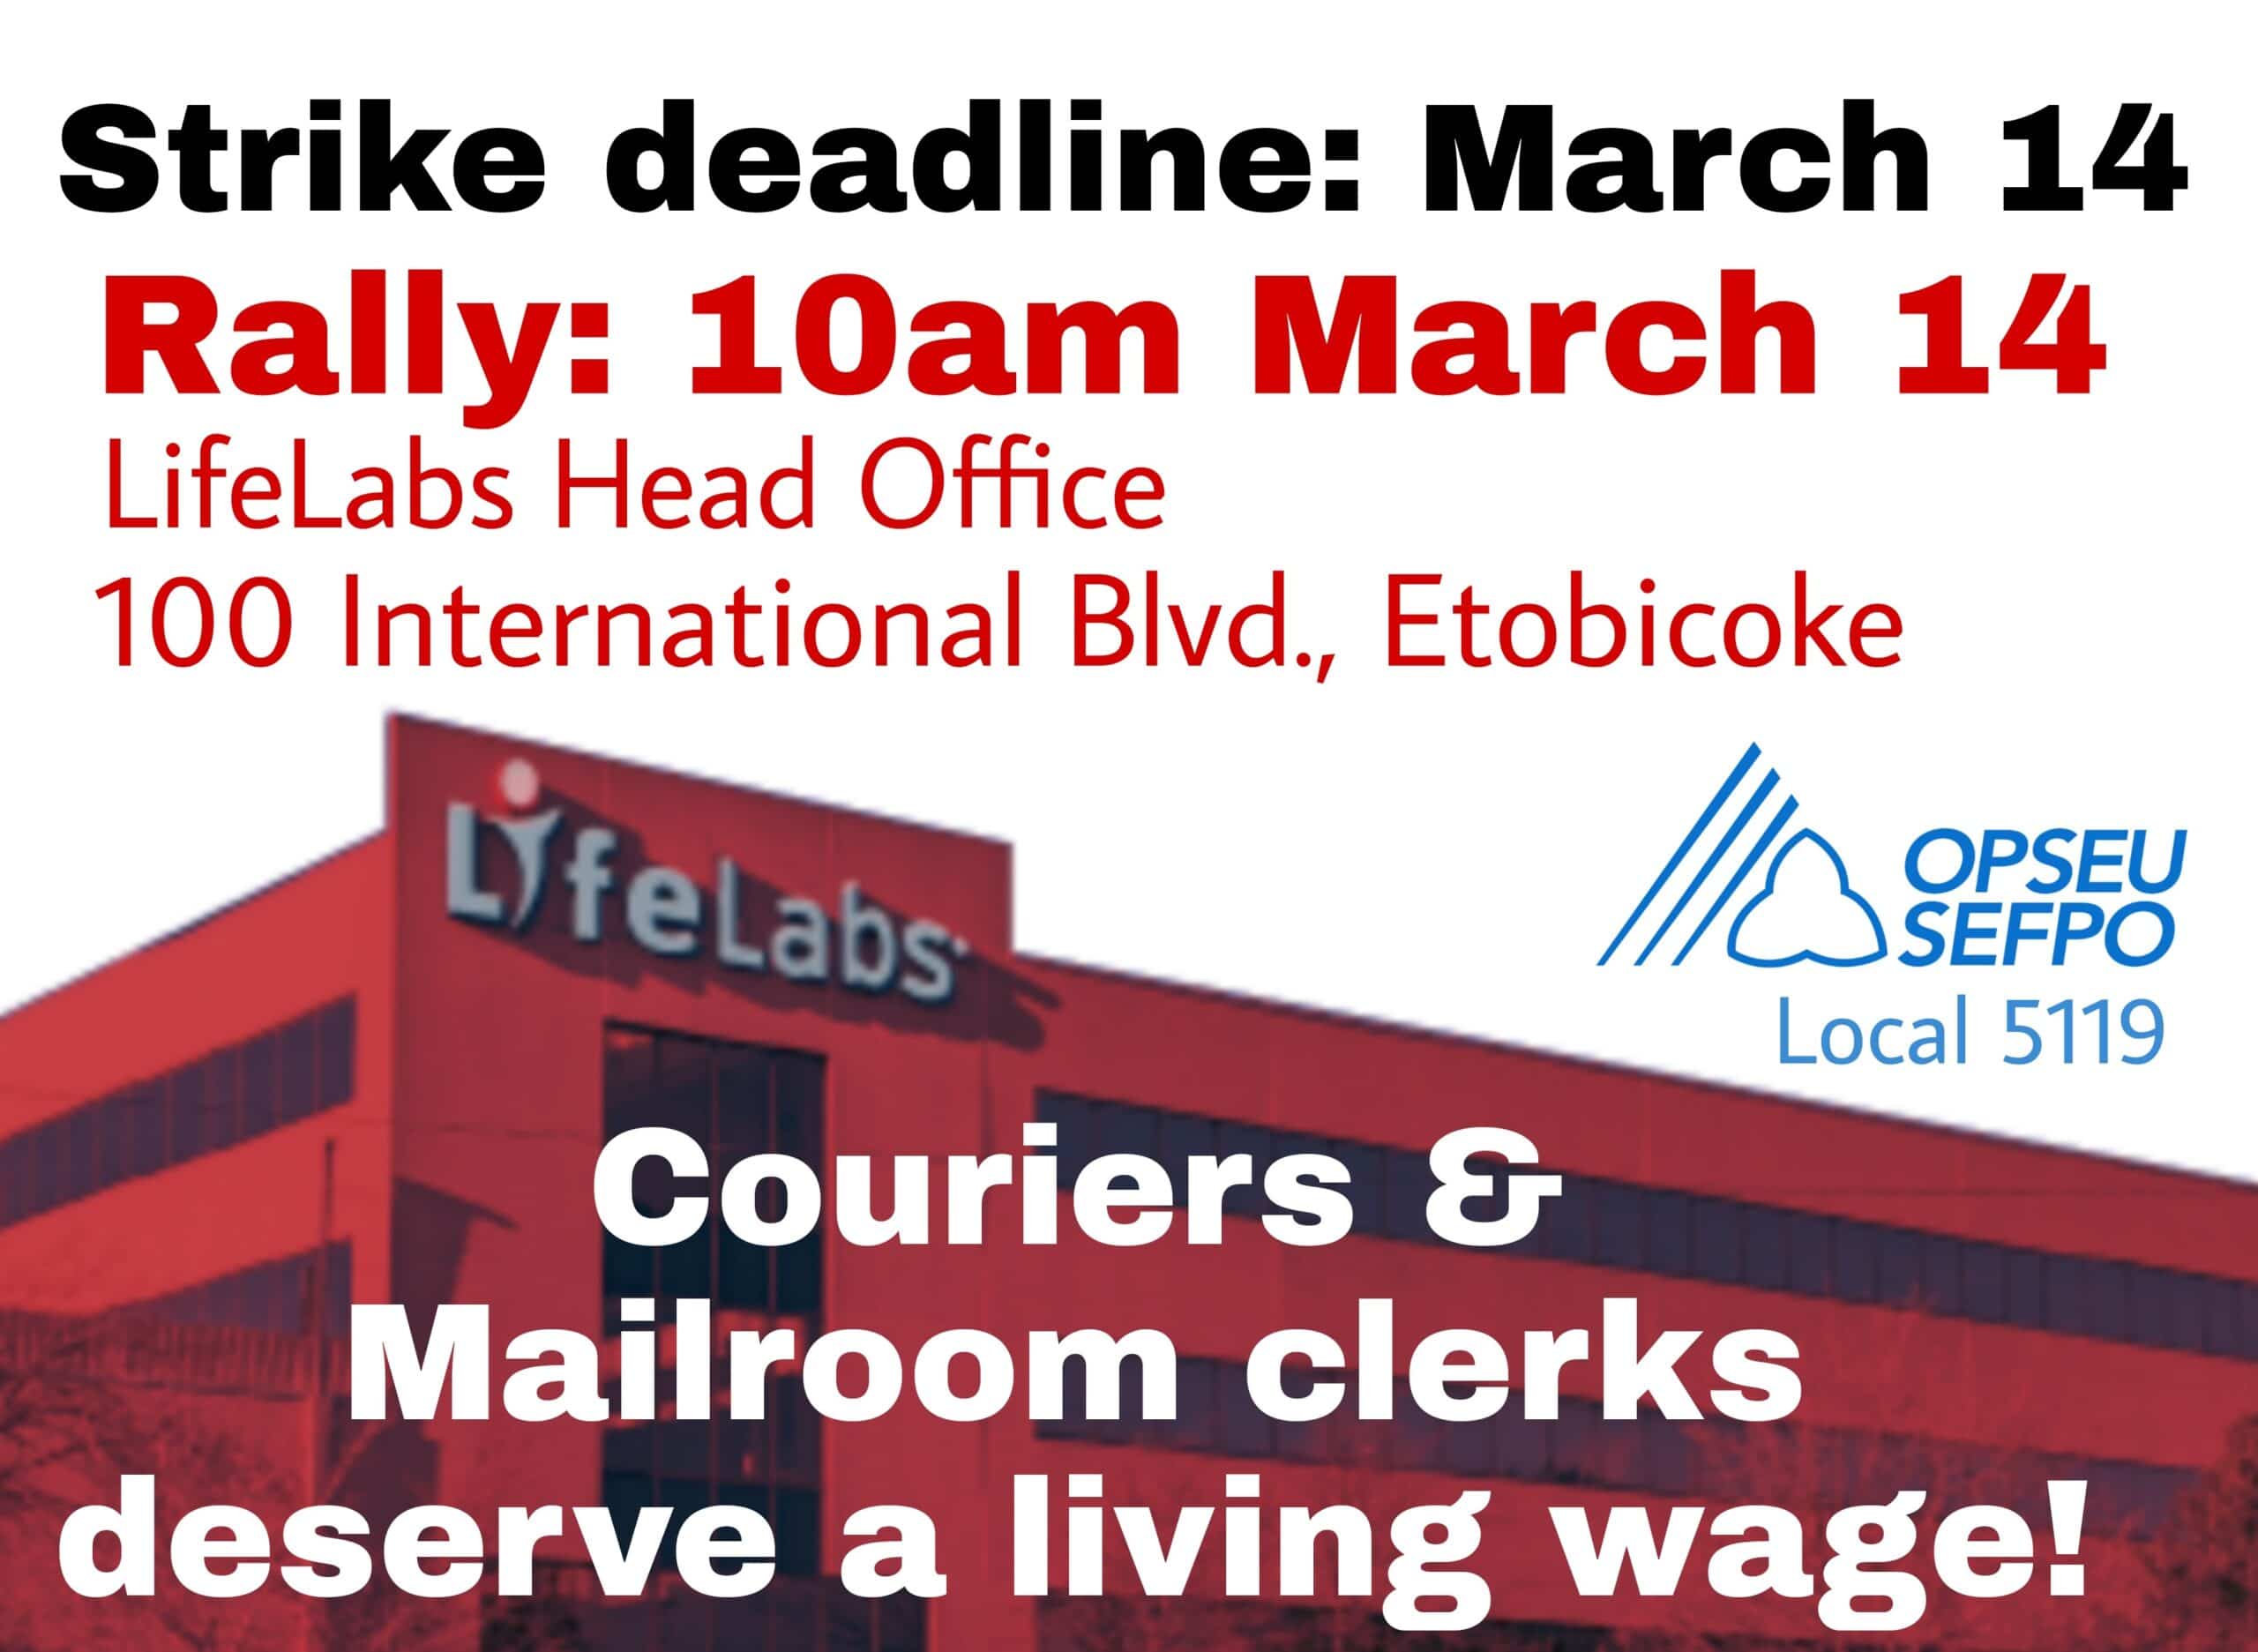 Poster showing LifeLabs' headquarters and giving the details for a strike rally